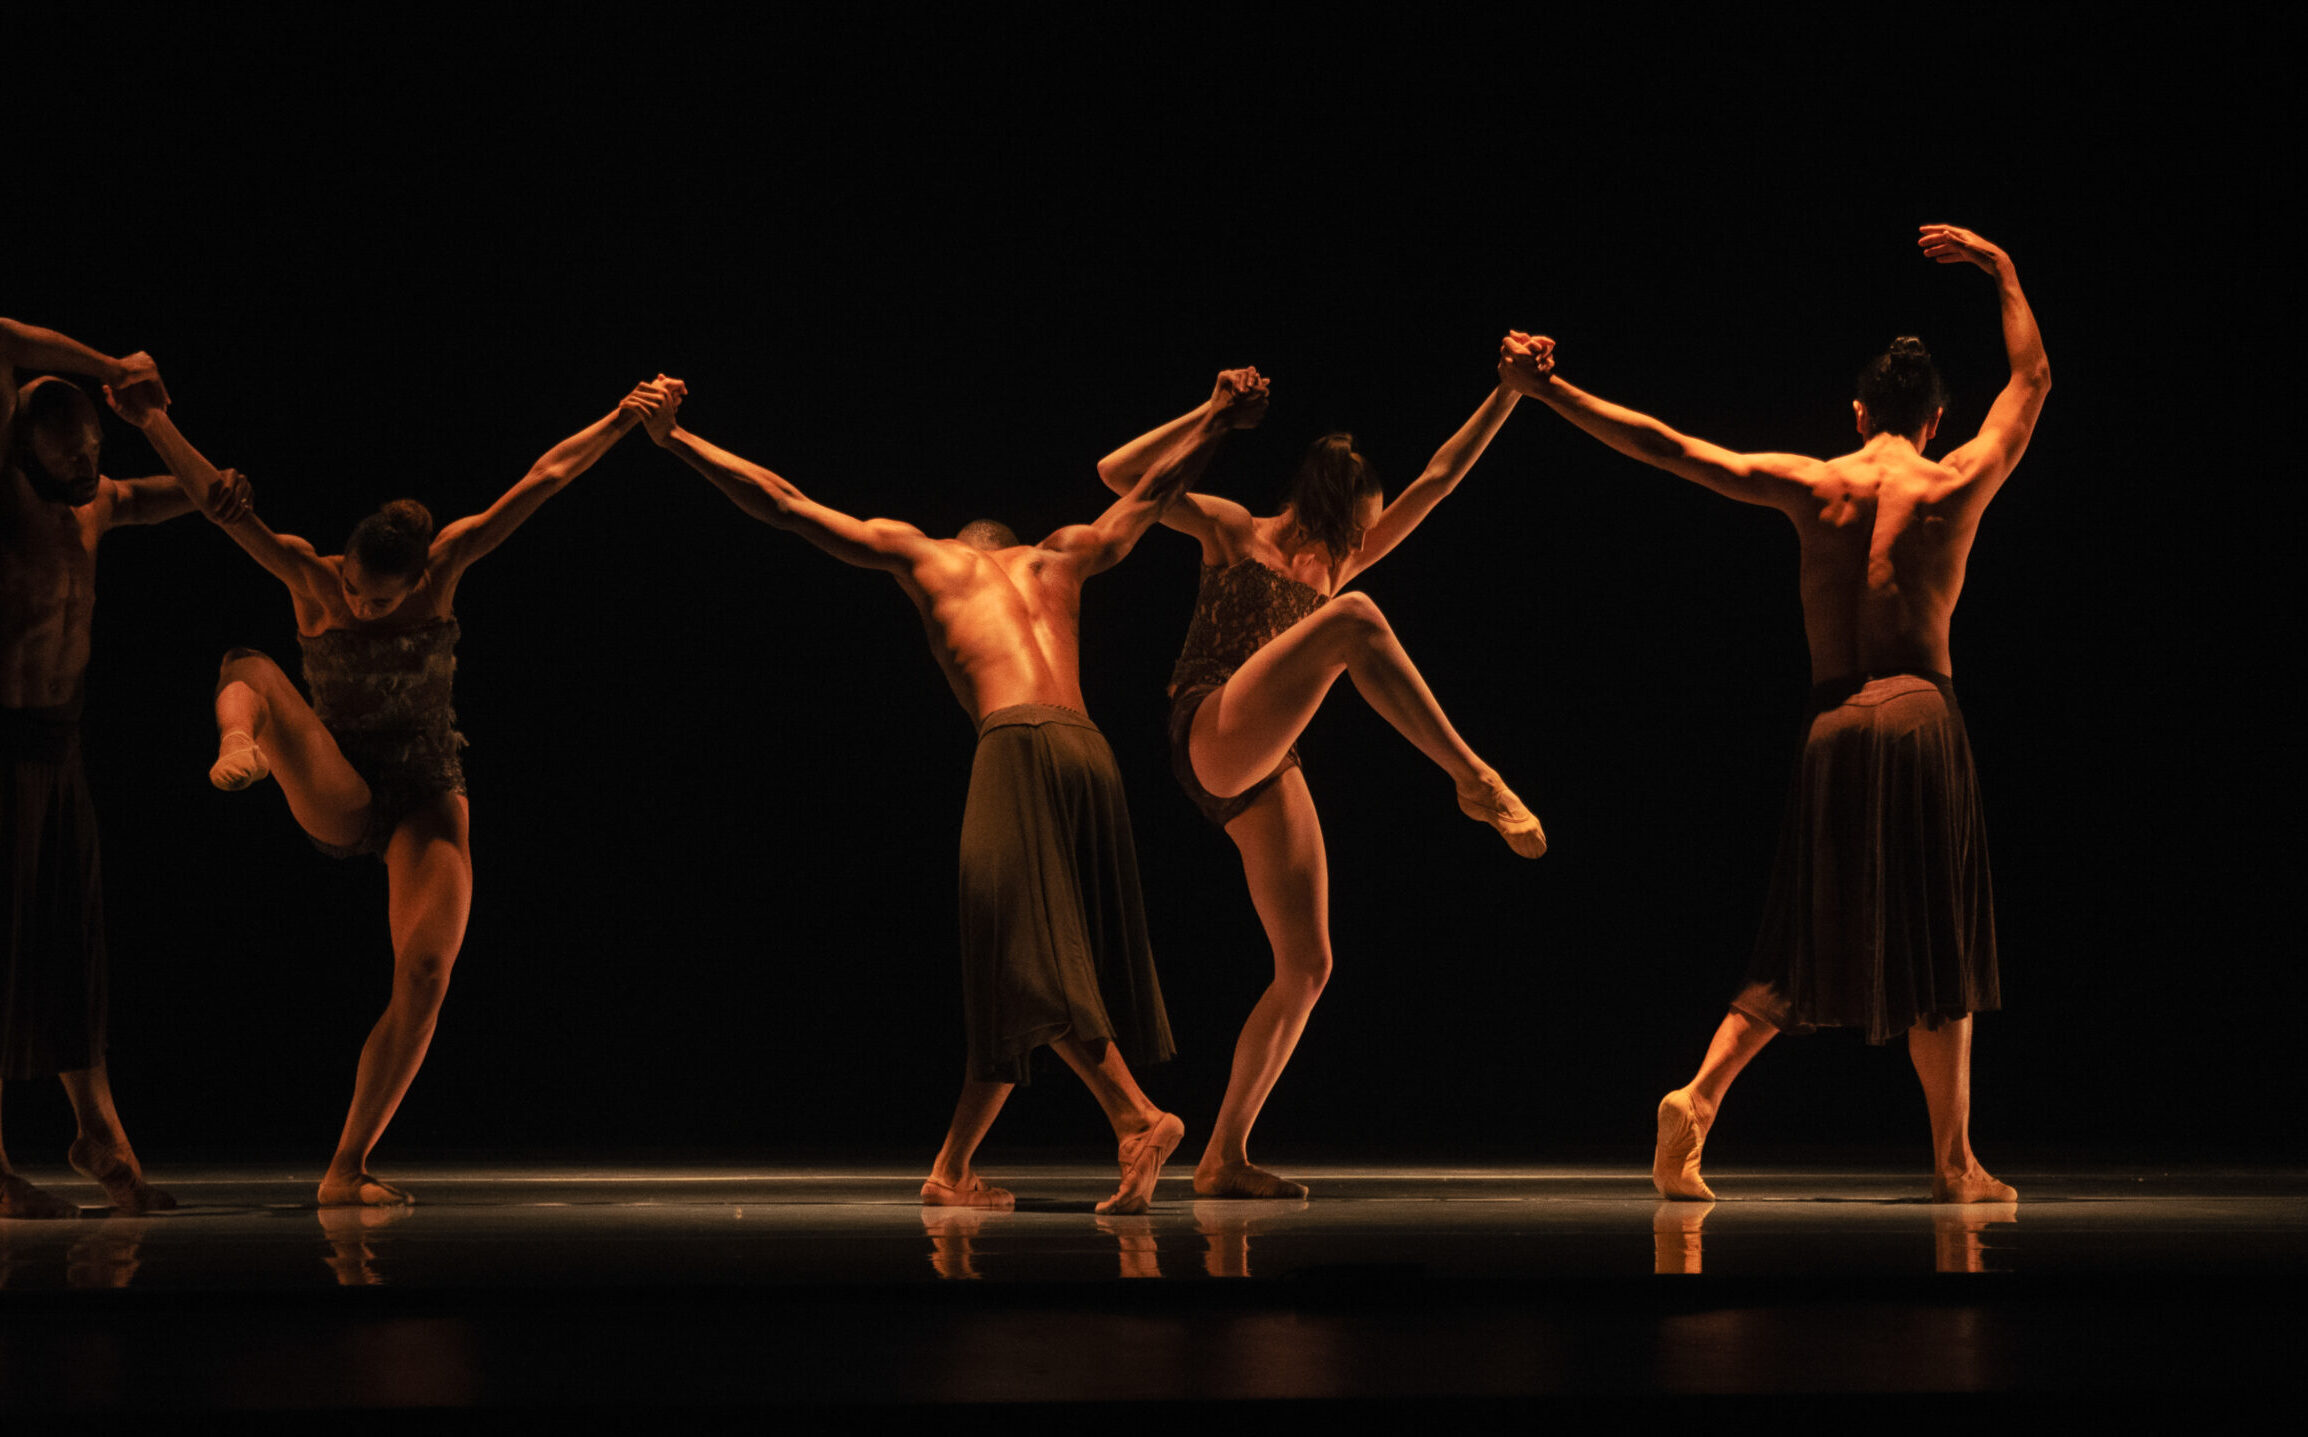 LINES Ballet company dancers performing in Alonzo King's "Deep River" on stage; dancers are moving together while holding hands in a line